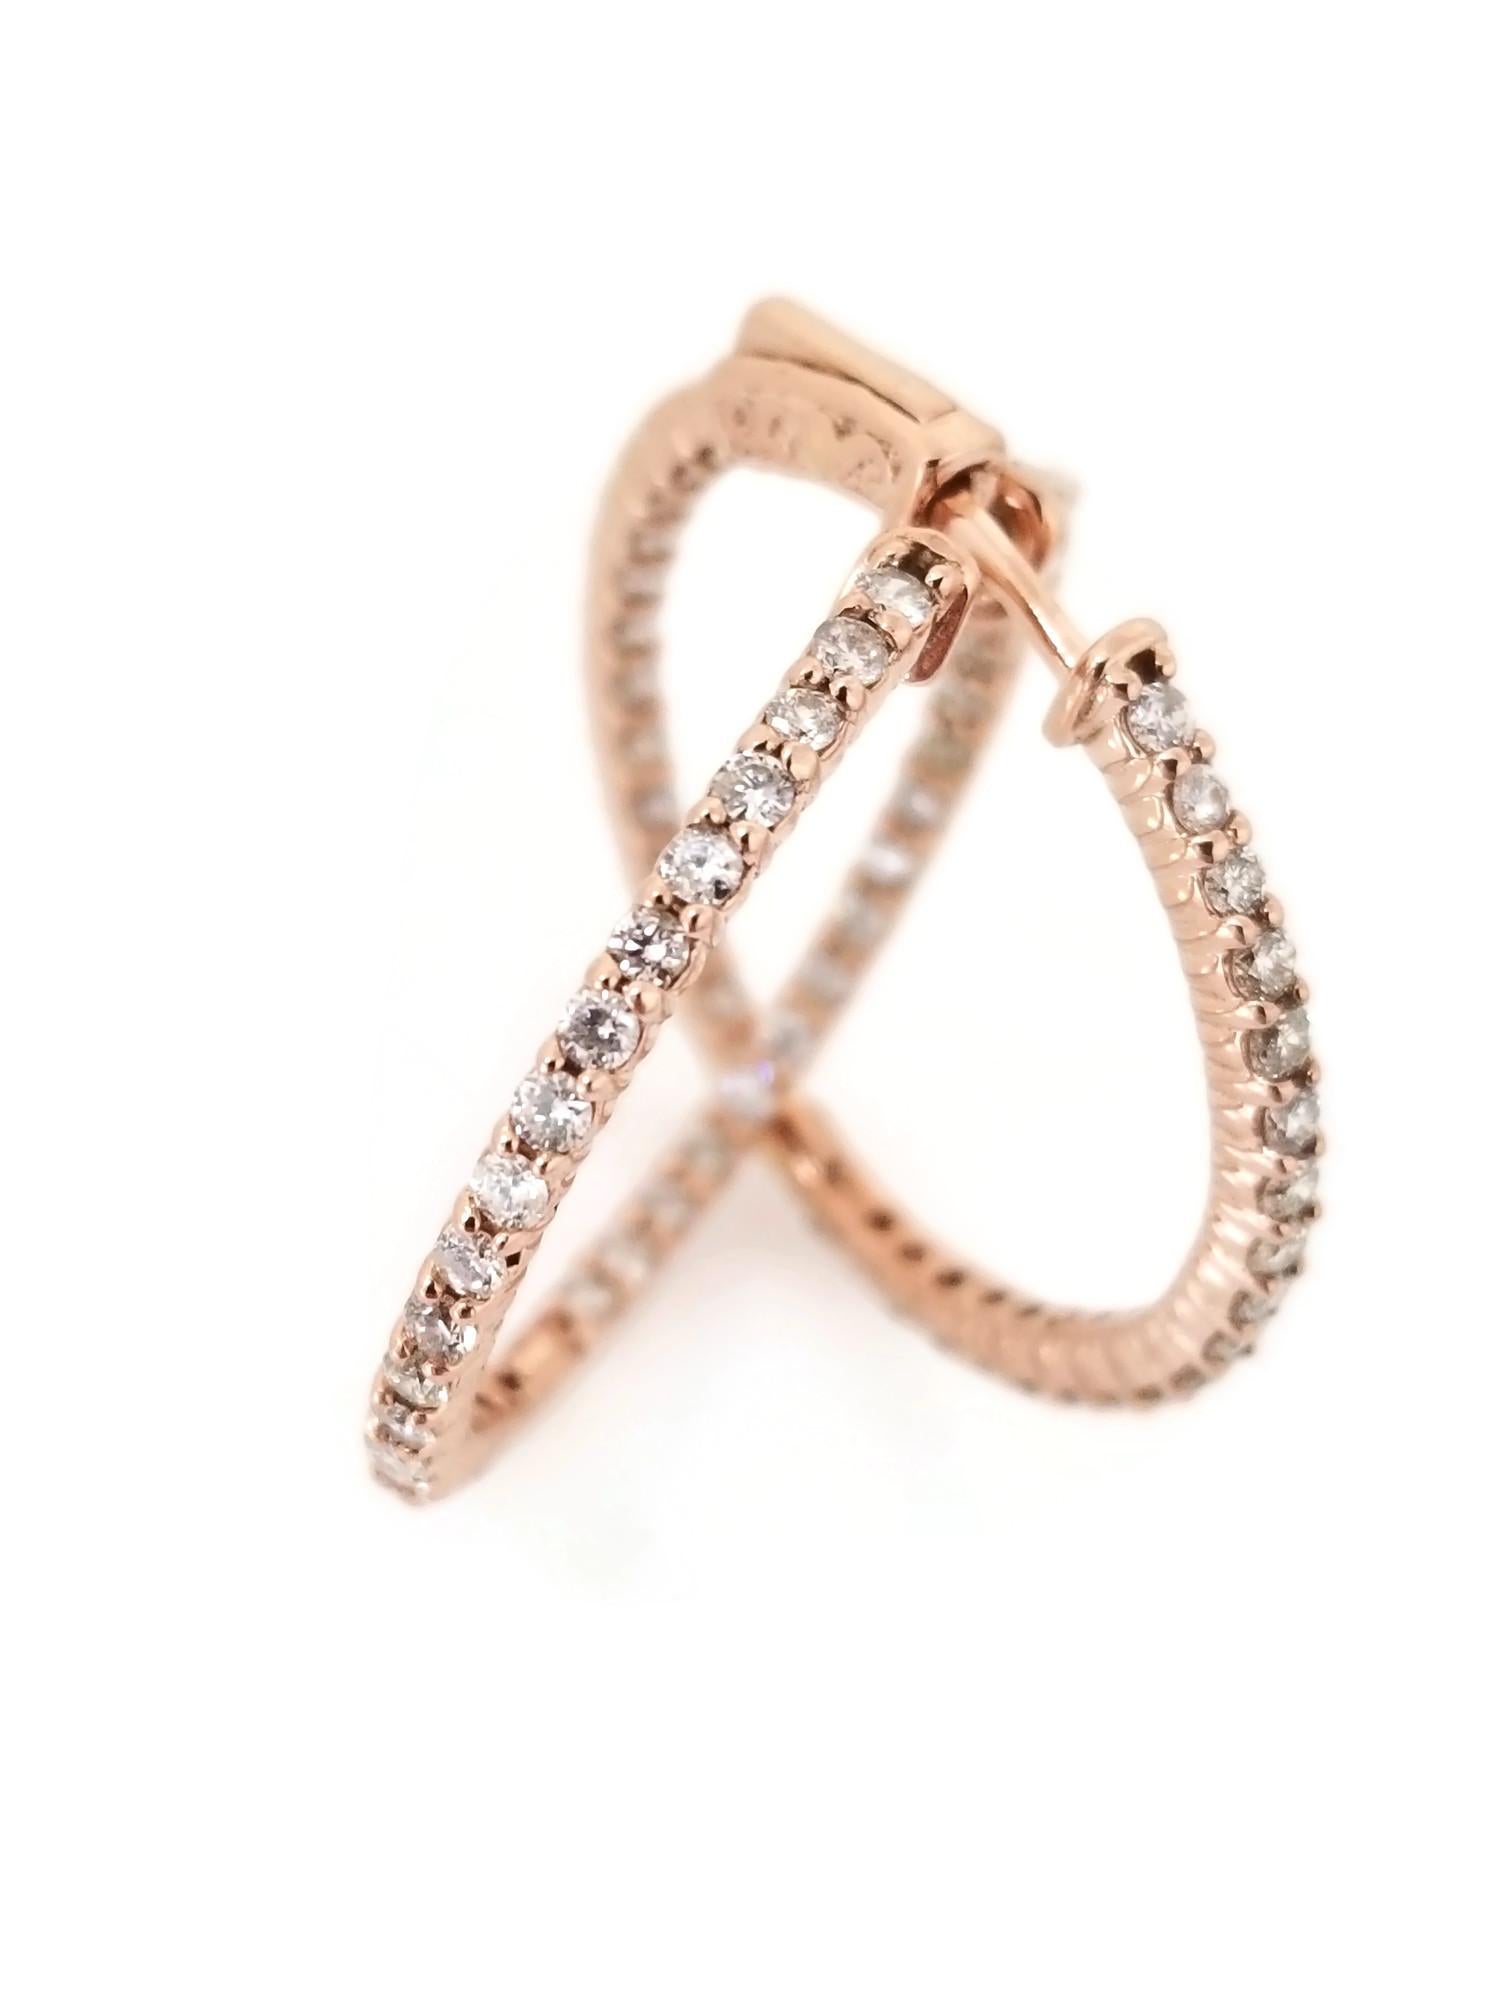 Beautiful pair of diamond inside out hoop earrings available in 14k rose gold. Secures with snap closure for wear.  Measures 1 inch in diameter. Elegant for any event.